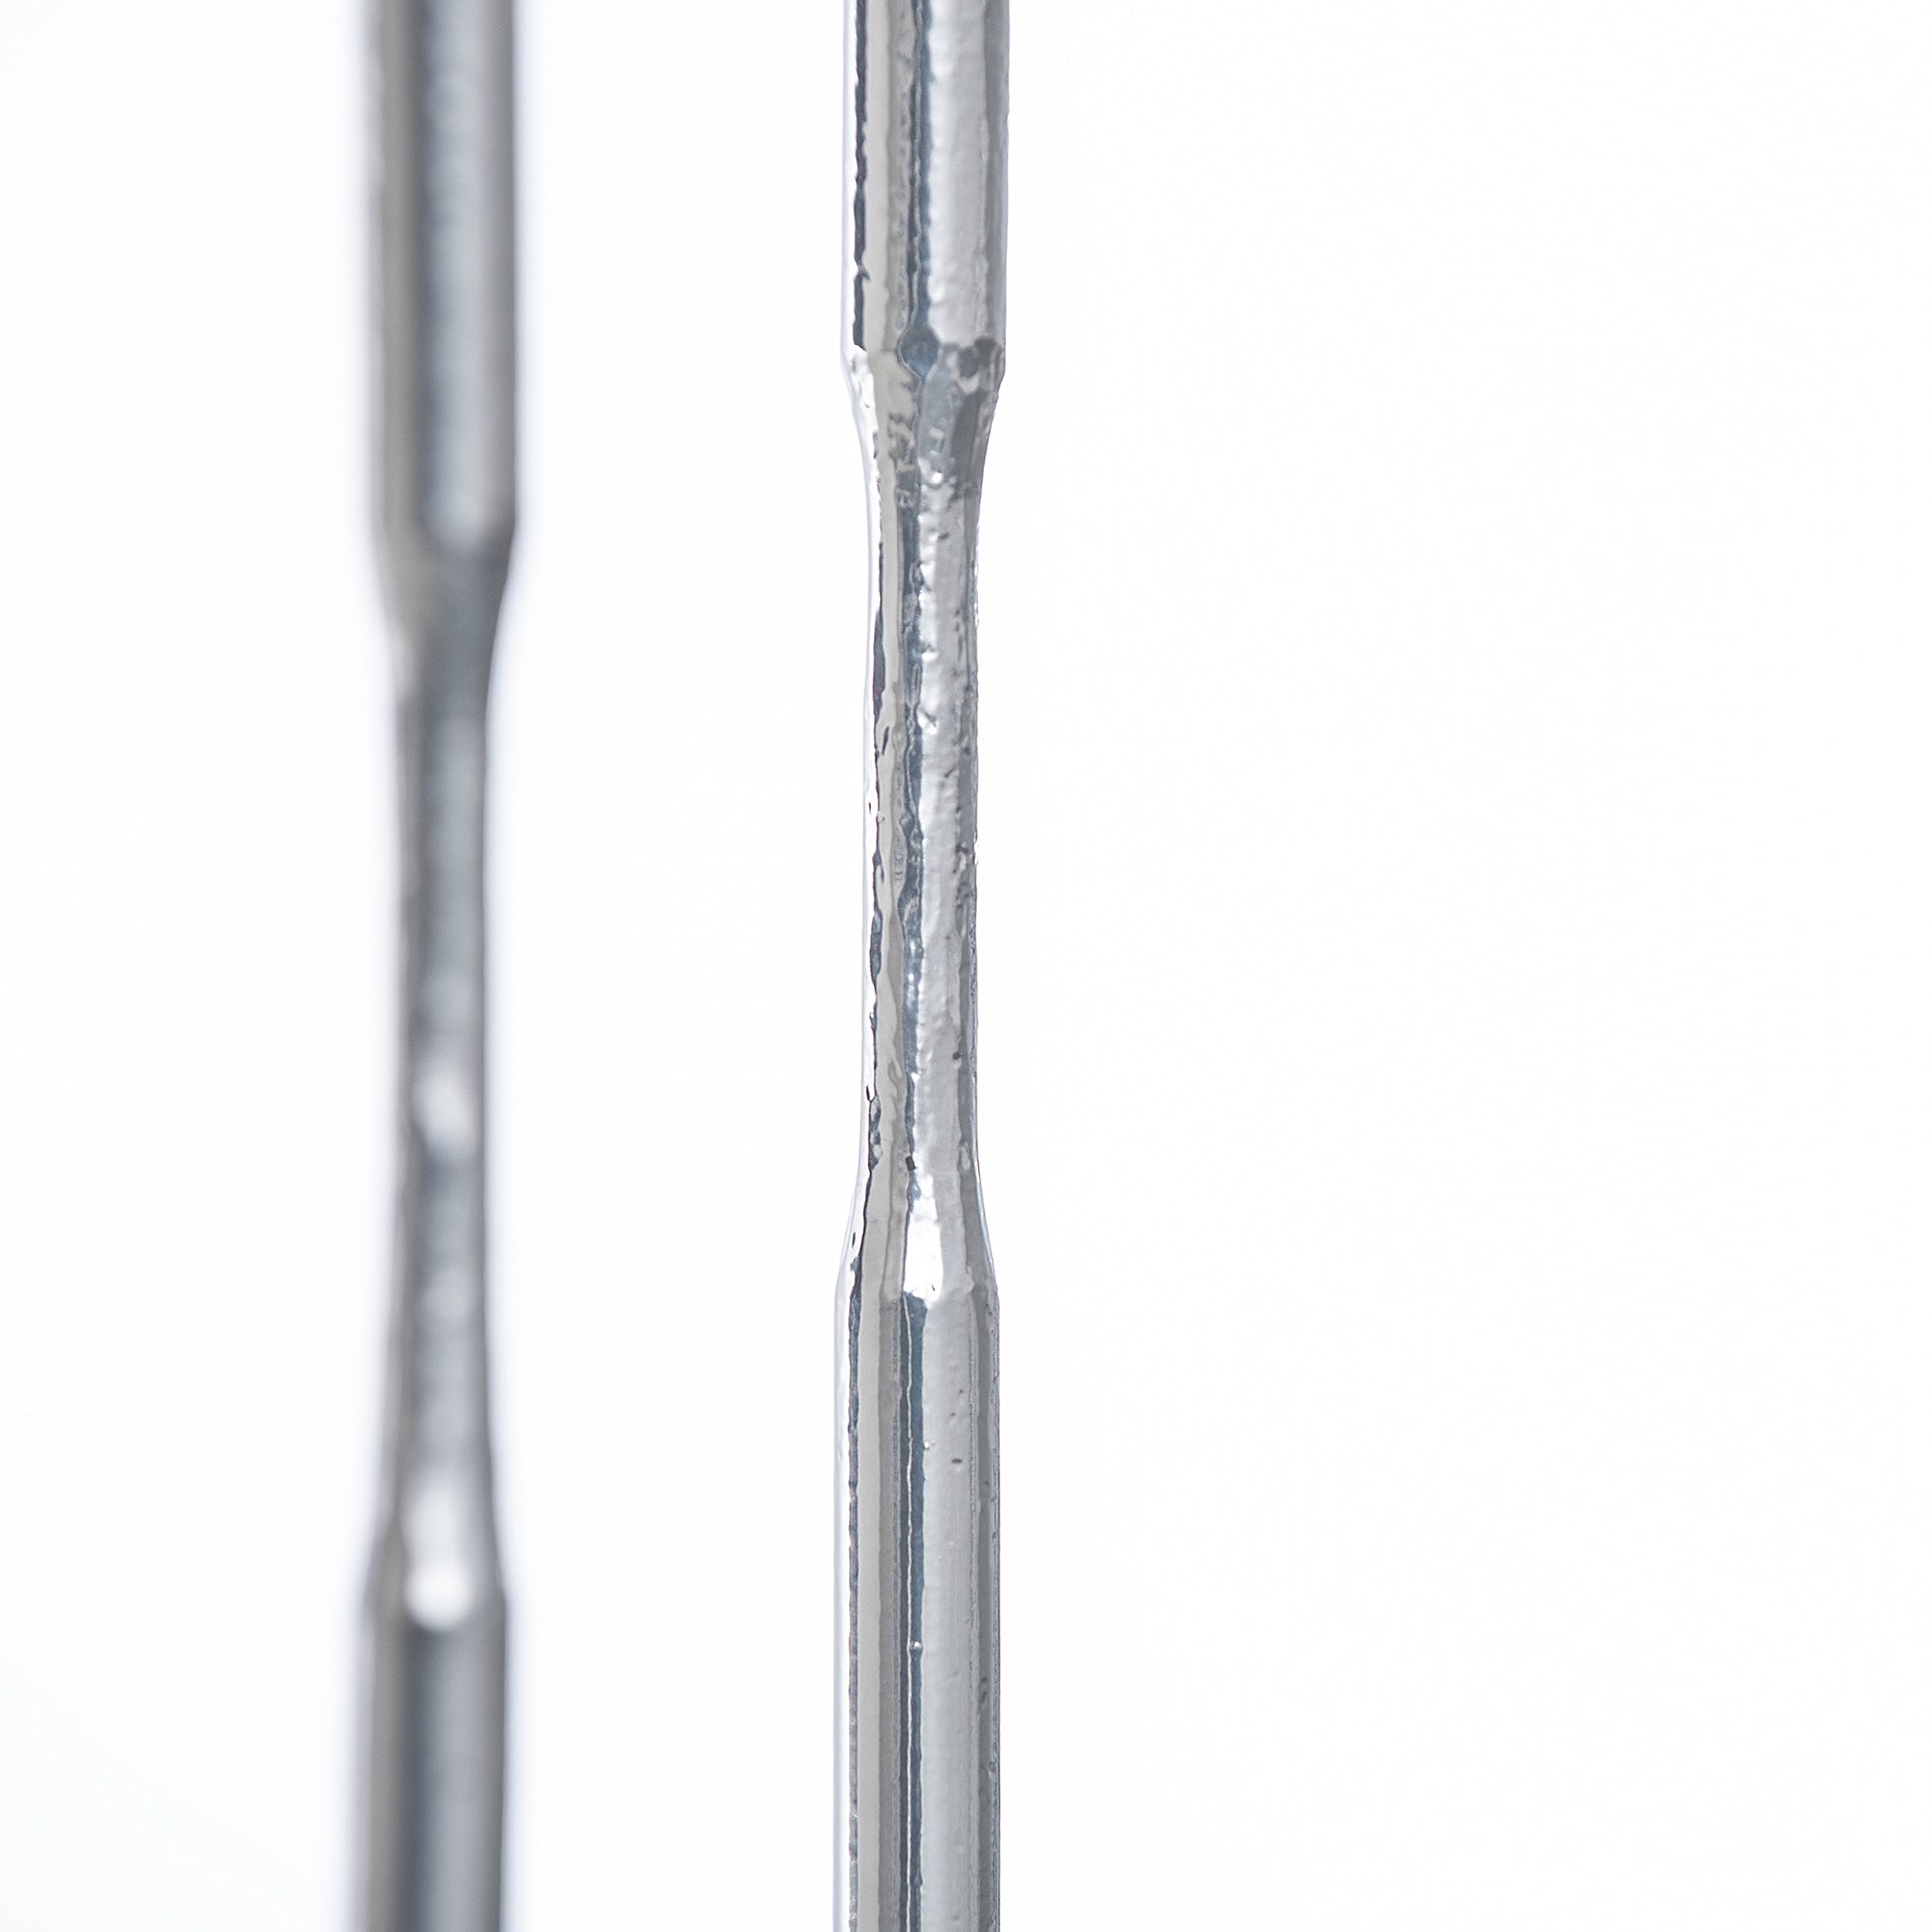 A close up of two metal rods on a white background, resembling a Senza Console Table by Hubbardton Forge.